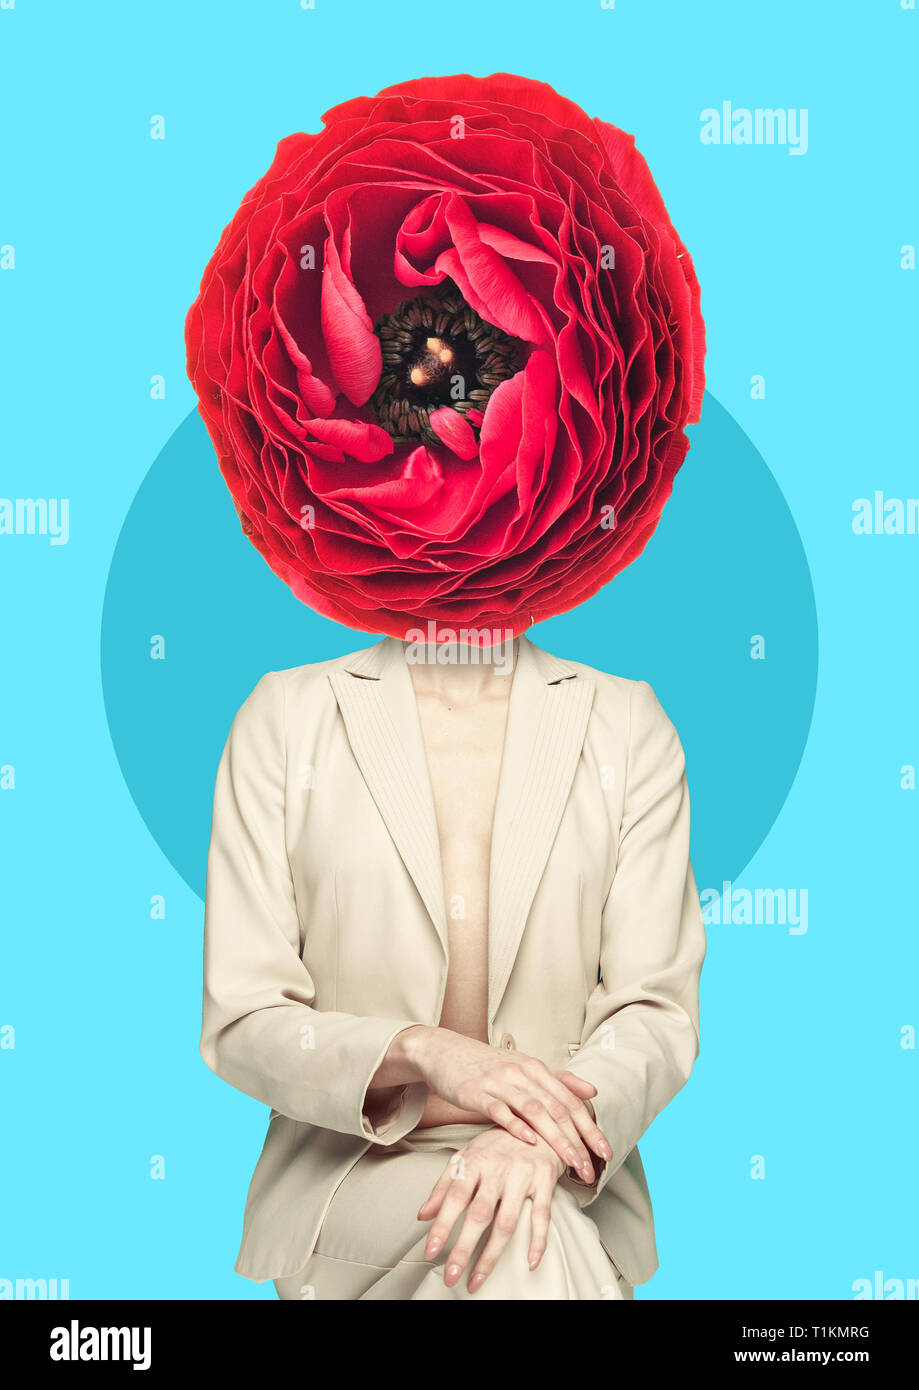 Femininity and clean thoughts. Young woman sitting in beige suit with blooming pink flower as a head against blue background. Modern design. Natural beauty concept. Contemporary pop-art collage. Stock Photo